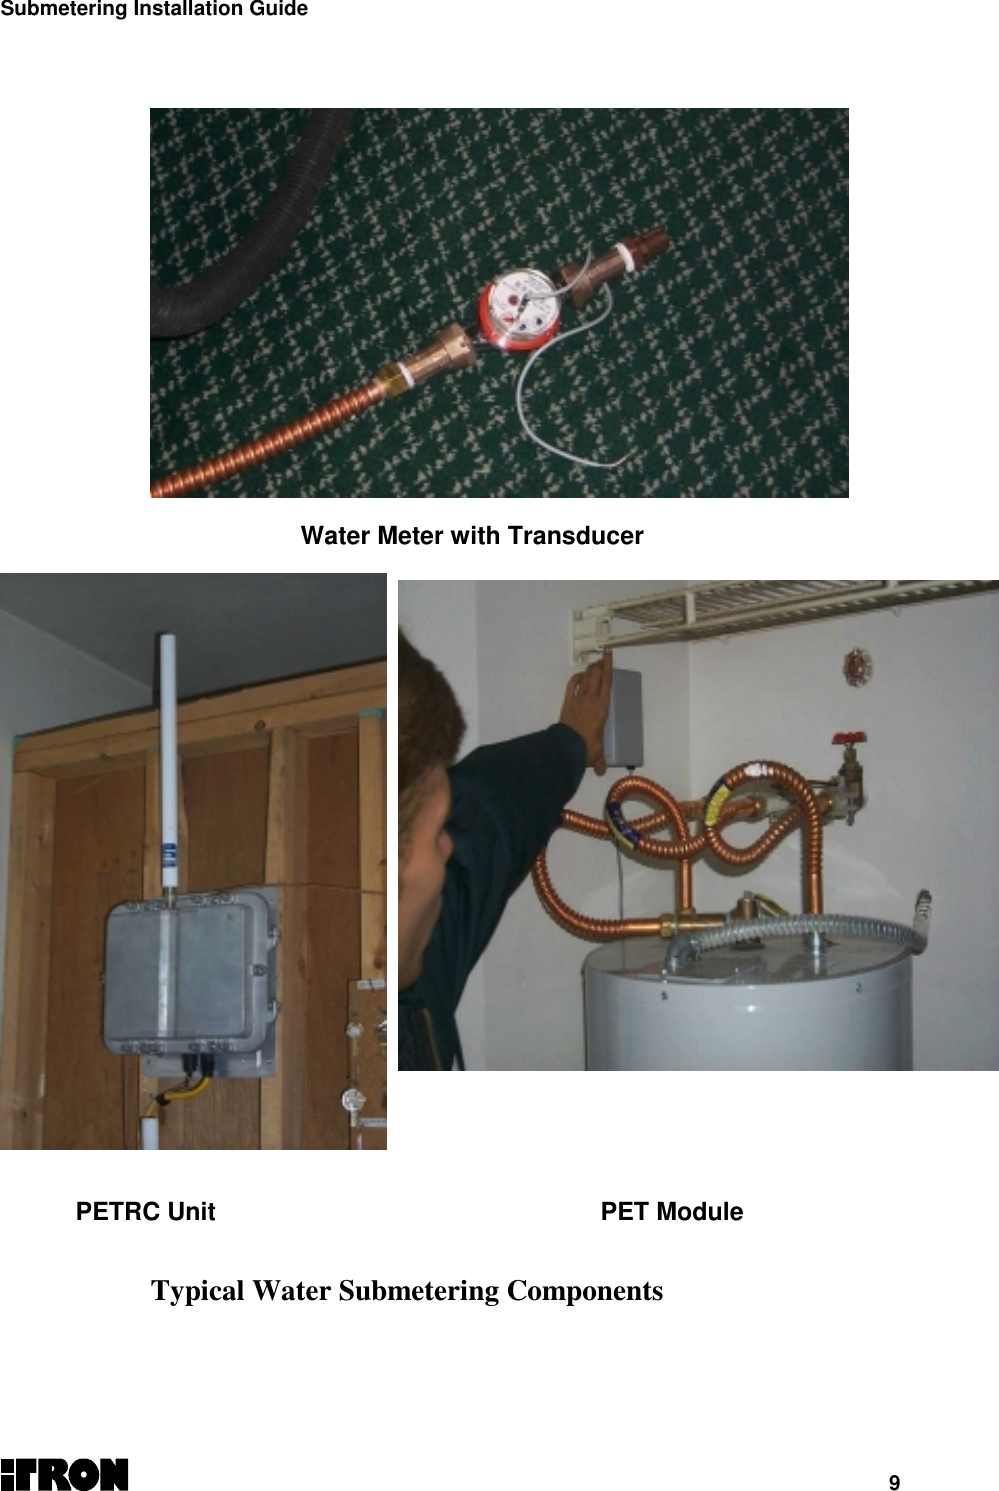 Submetering Installation Guide9Water Meter with TransducerPETRC Unit PET Module Typical Water Submetering Components 